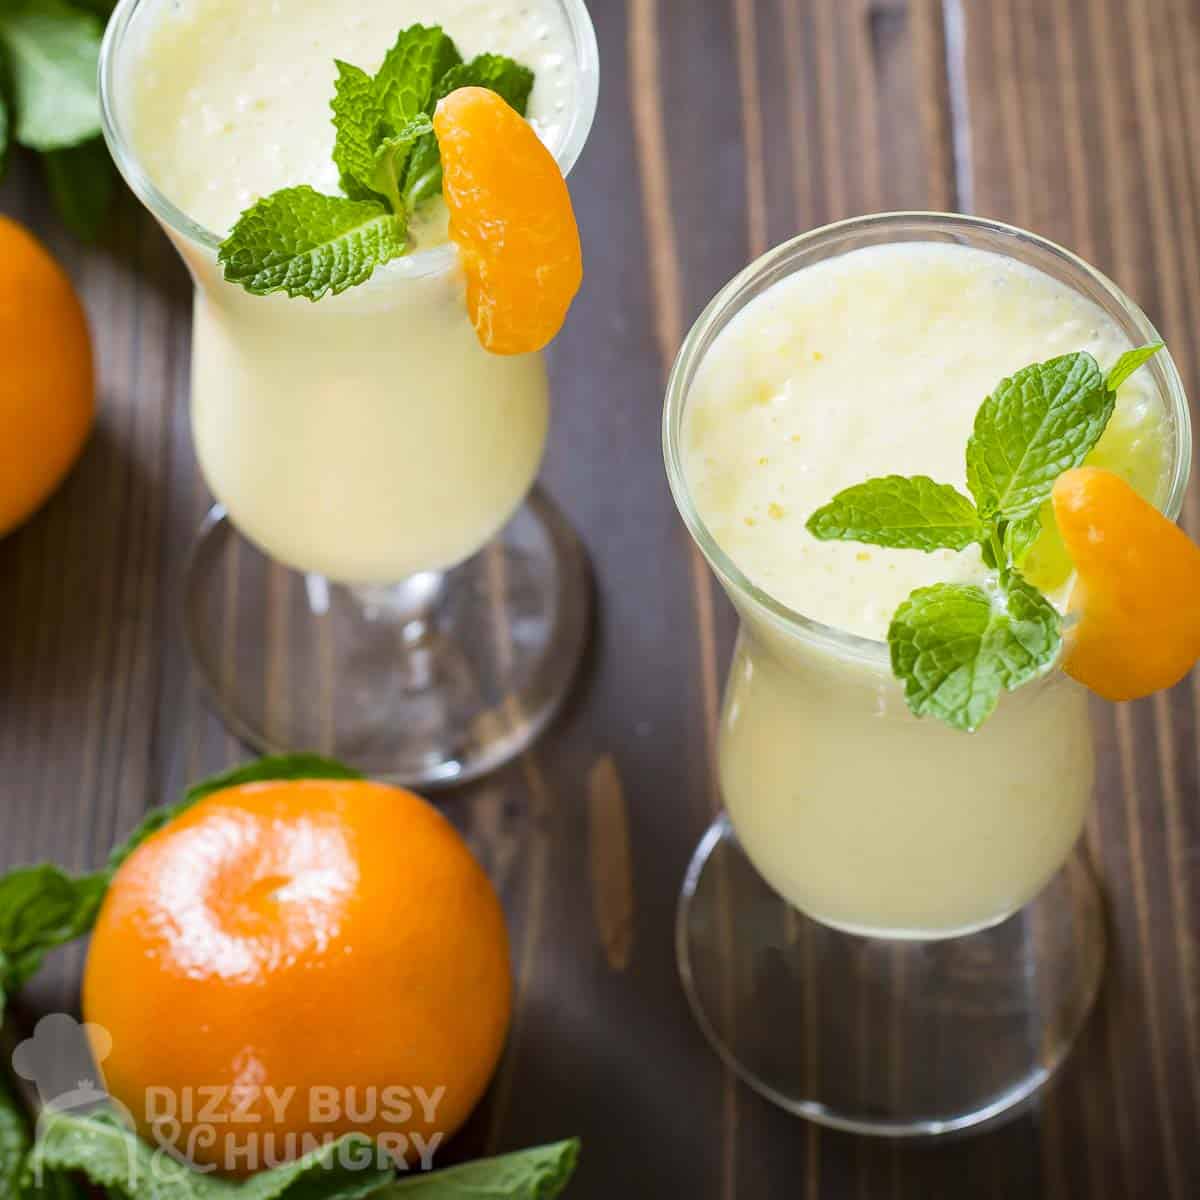 Overhead angled shot of two cocktail glasses with orange pineapple smoothie garnished with orange slices and mint with whole oranges and mint sprigs on the side.